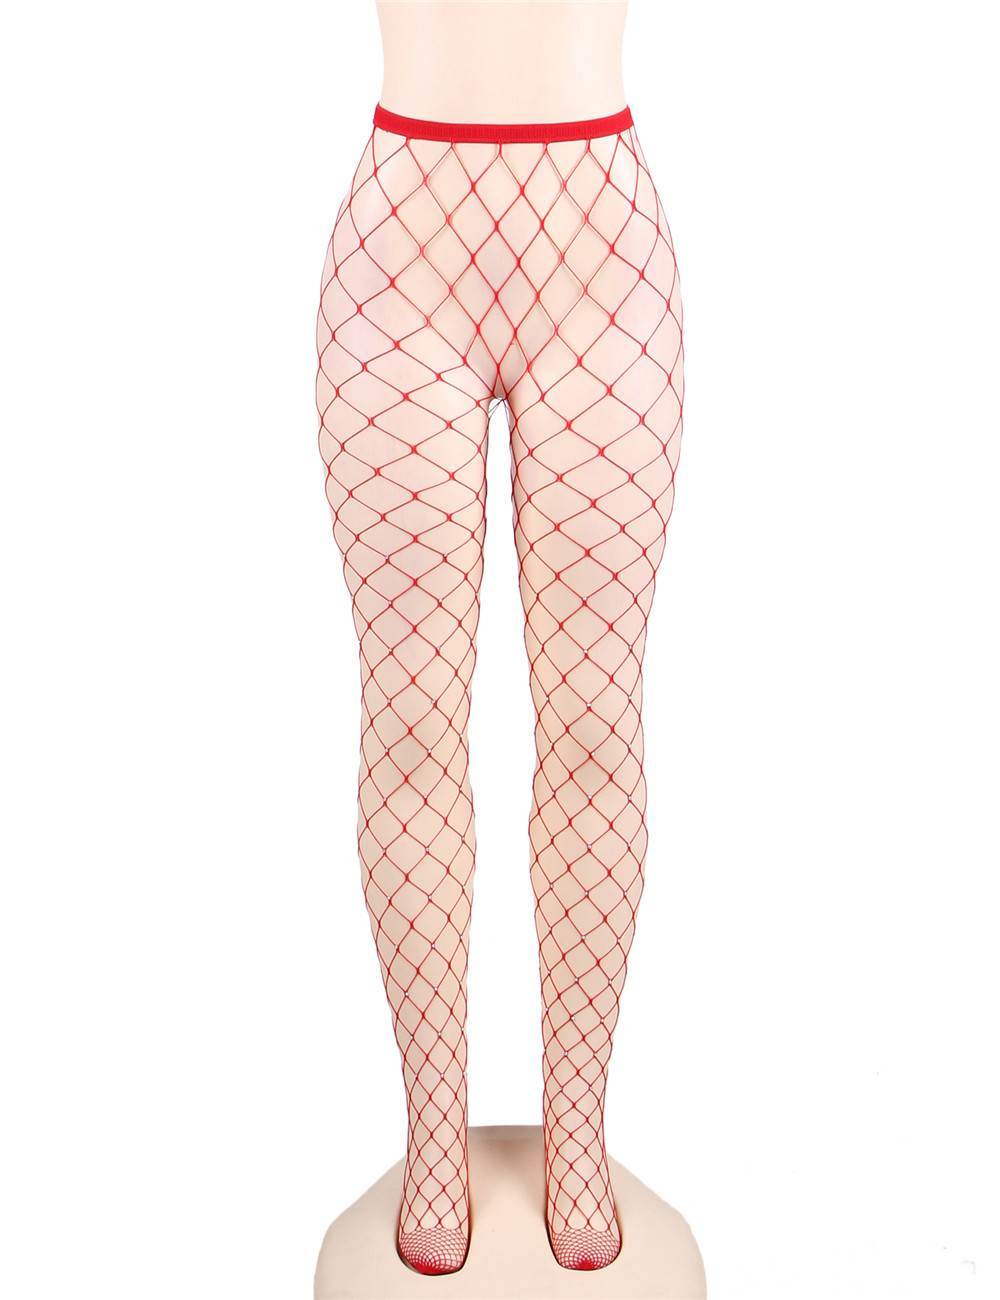 Rhinestone Net Pantyhose - One Size Fits Most - Lingerie